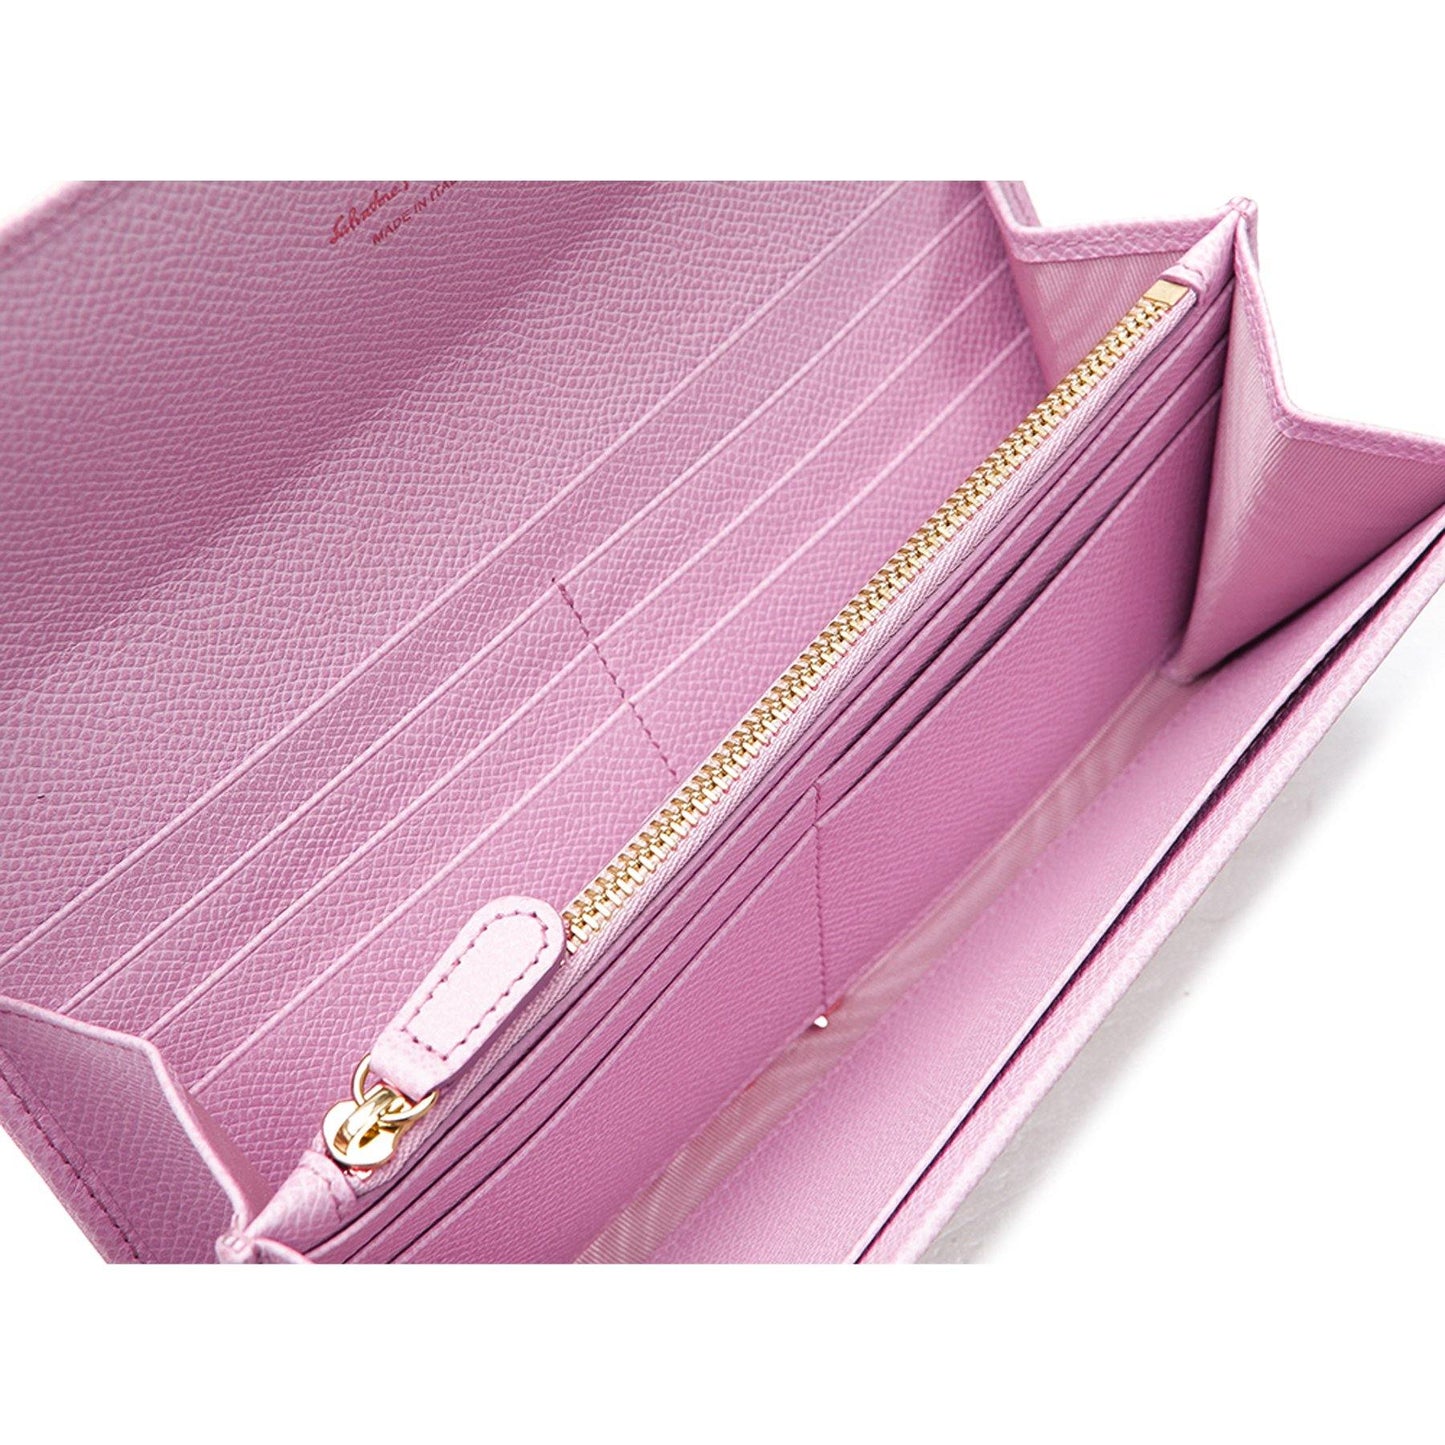 Gancini Continental Wallet 22 D149 - Cosmos Boutique New Jersey